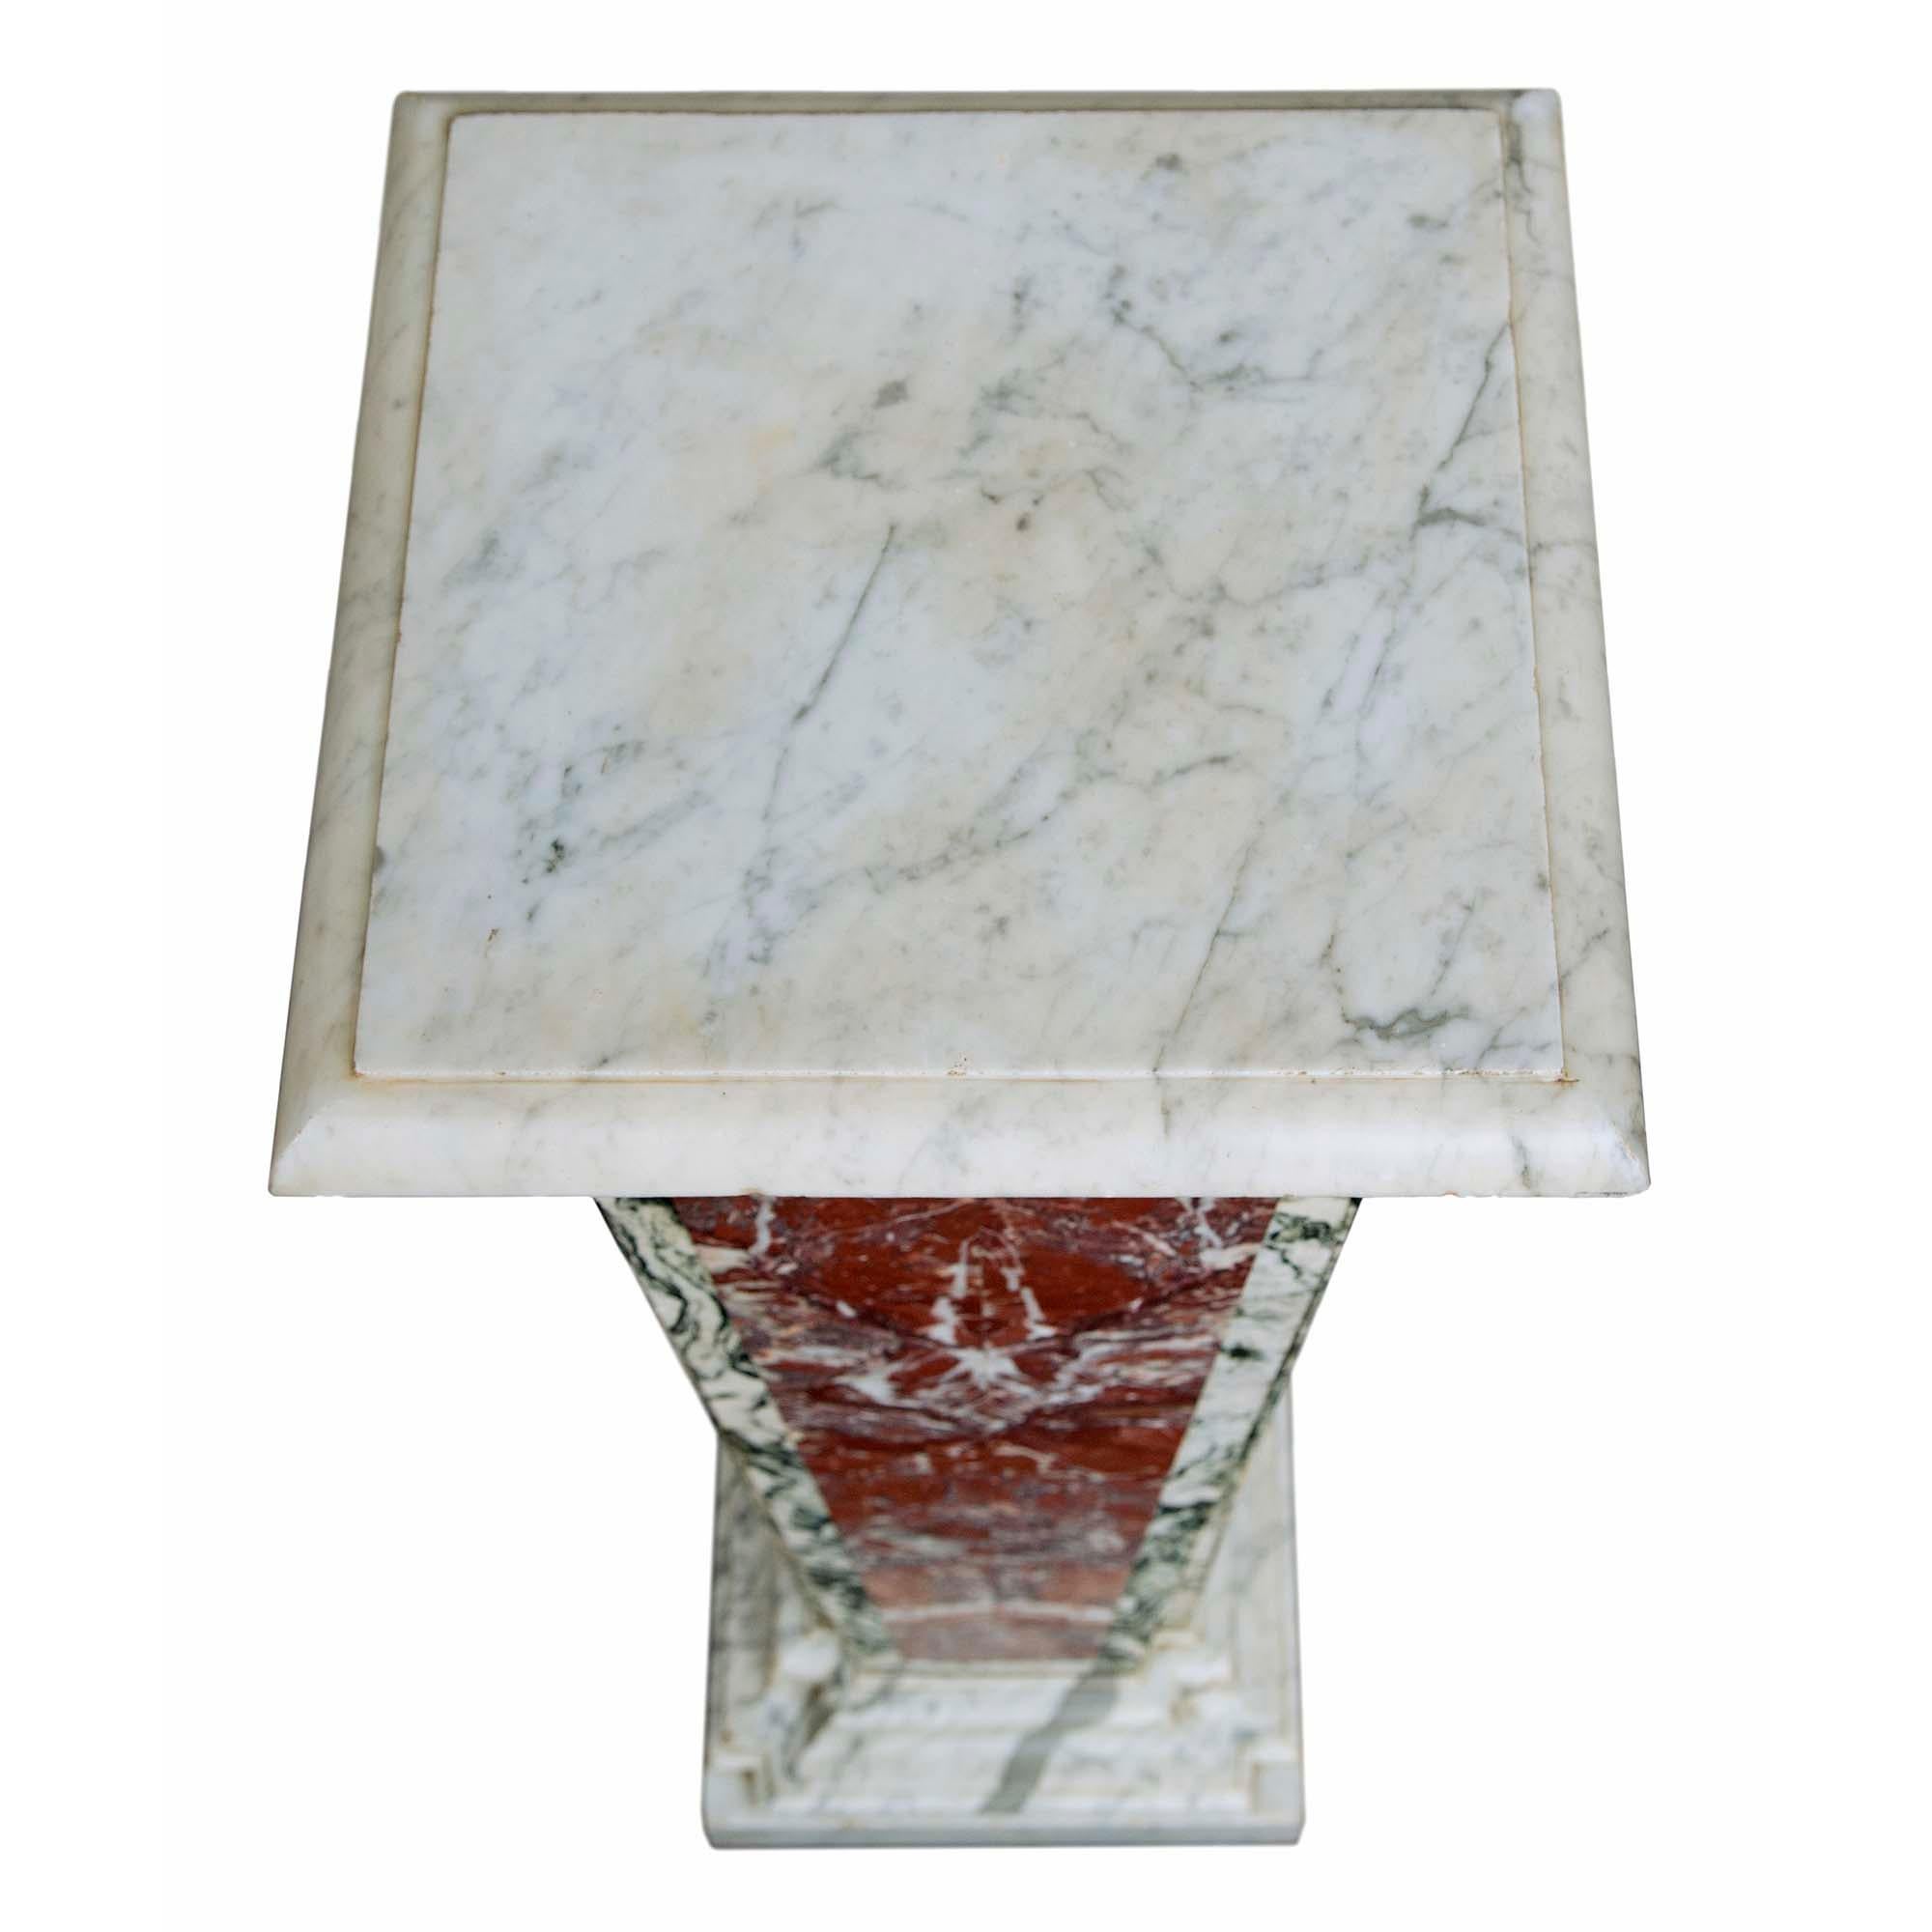 A truly stunning pair of Italian 19th century Neo-Classical st. marble pedestals. The square tapered pair of pedestals are raised by square mottled edge white Carrara marble bases. The tapered column with cut corners have a central butterfly